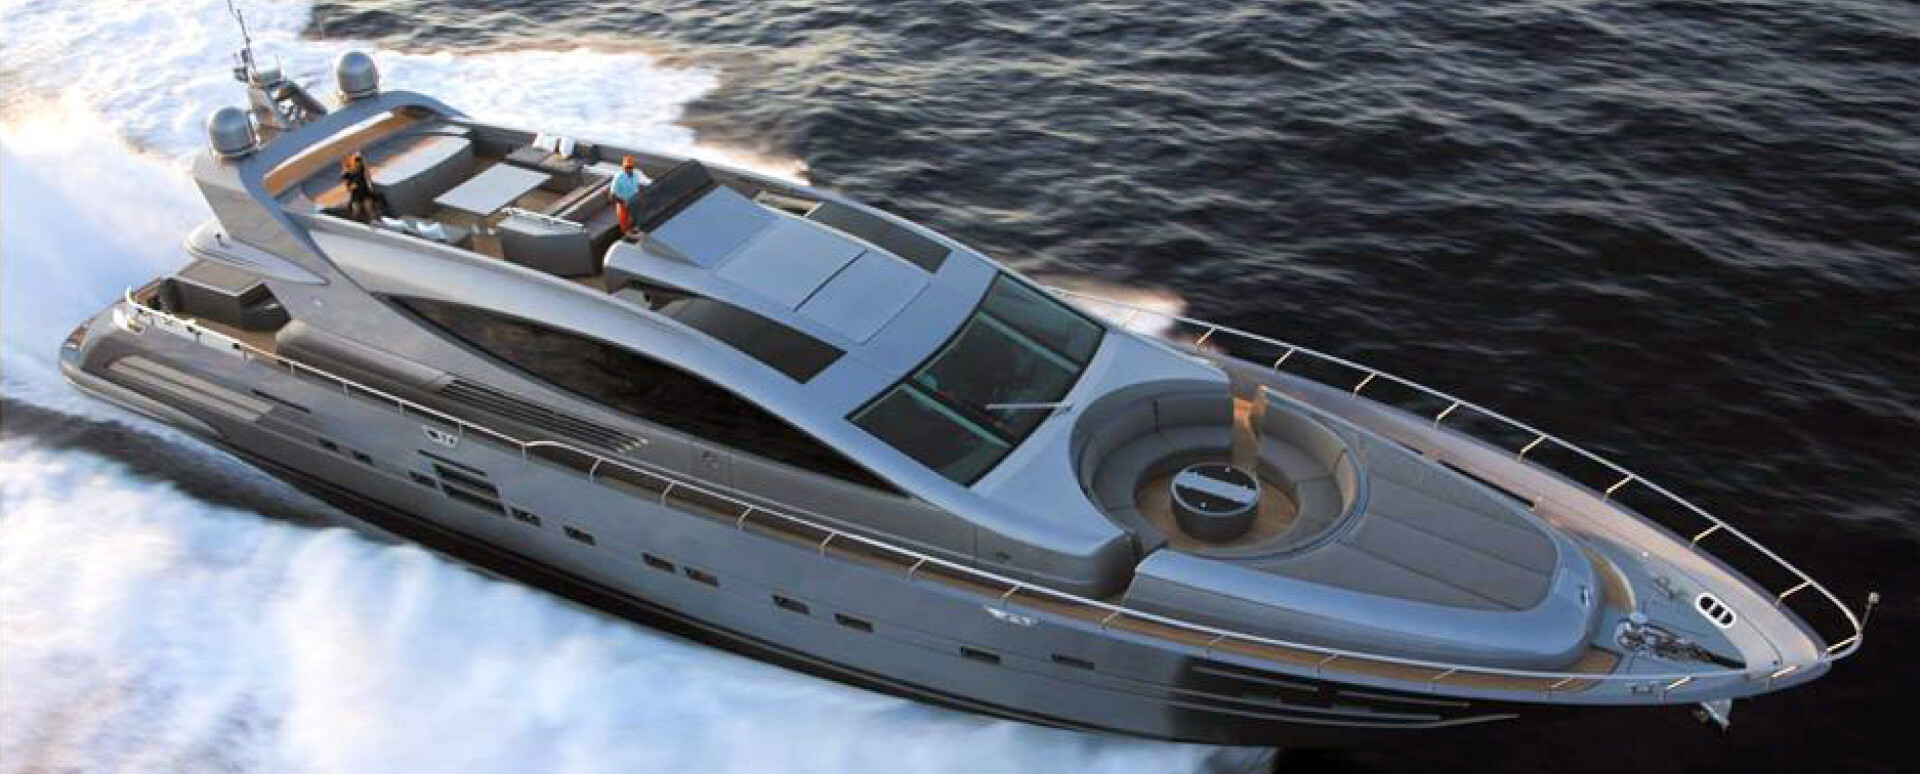                                                                                                     31m M/Y MUSE: SOLD!
                                                                                            